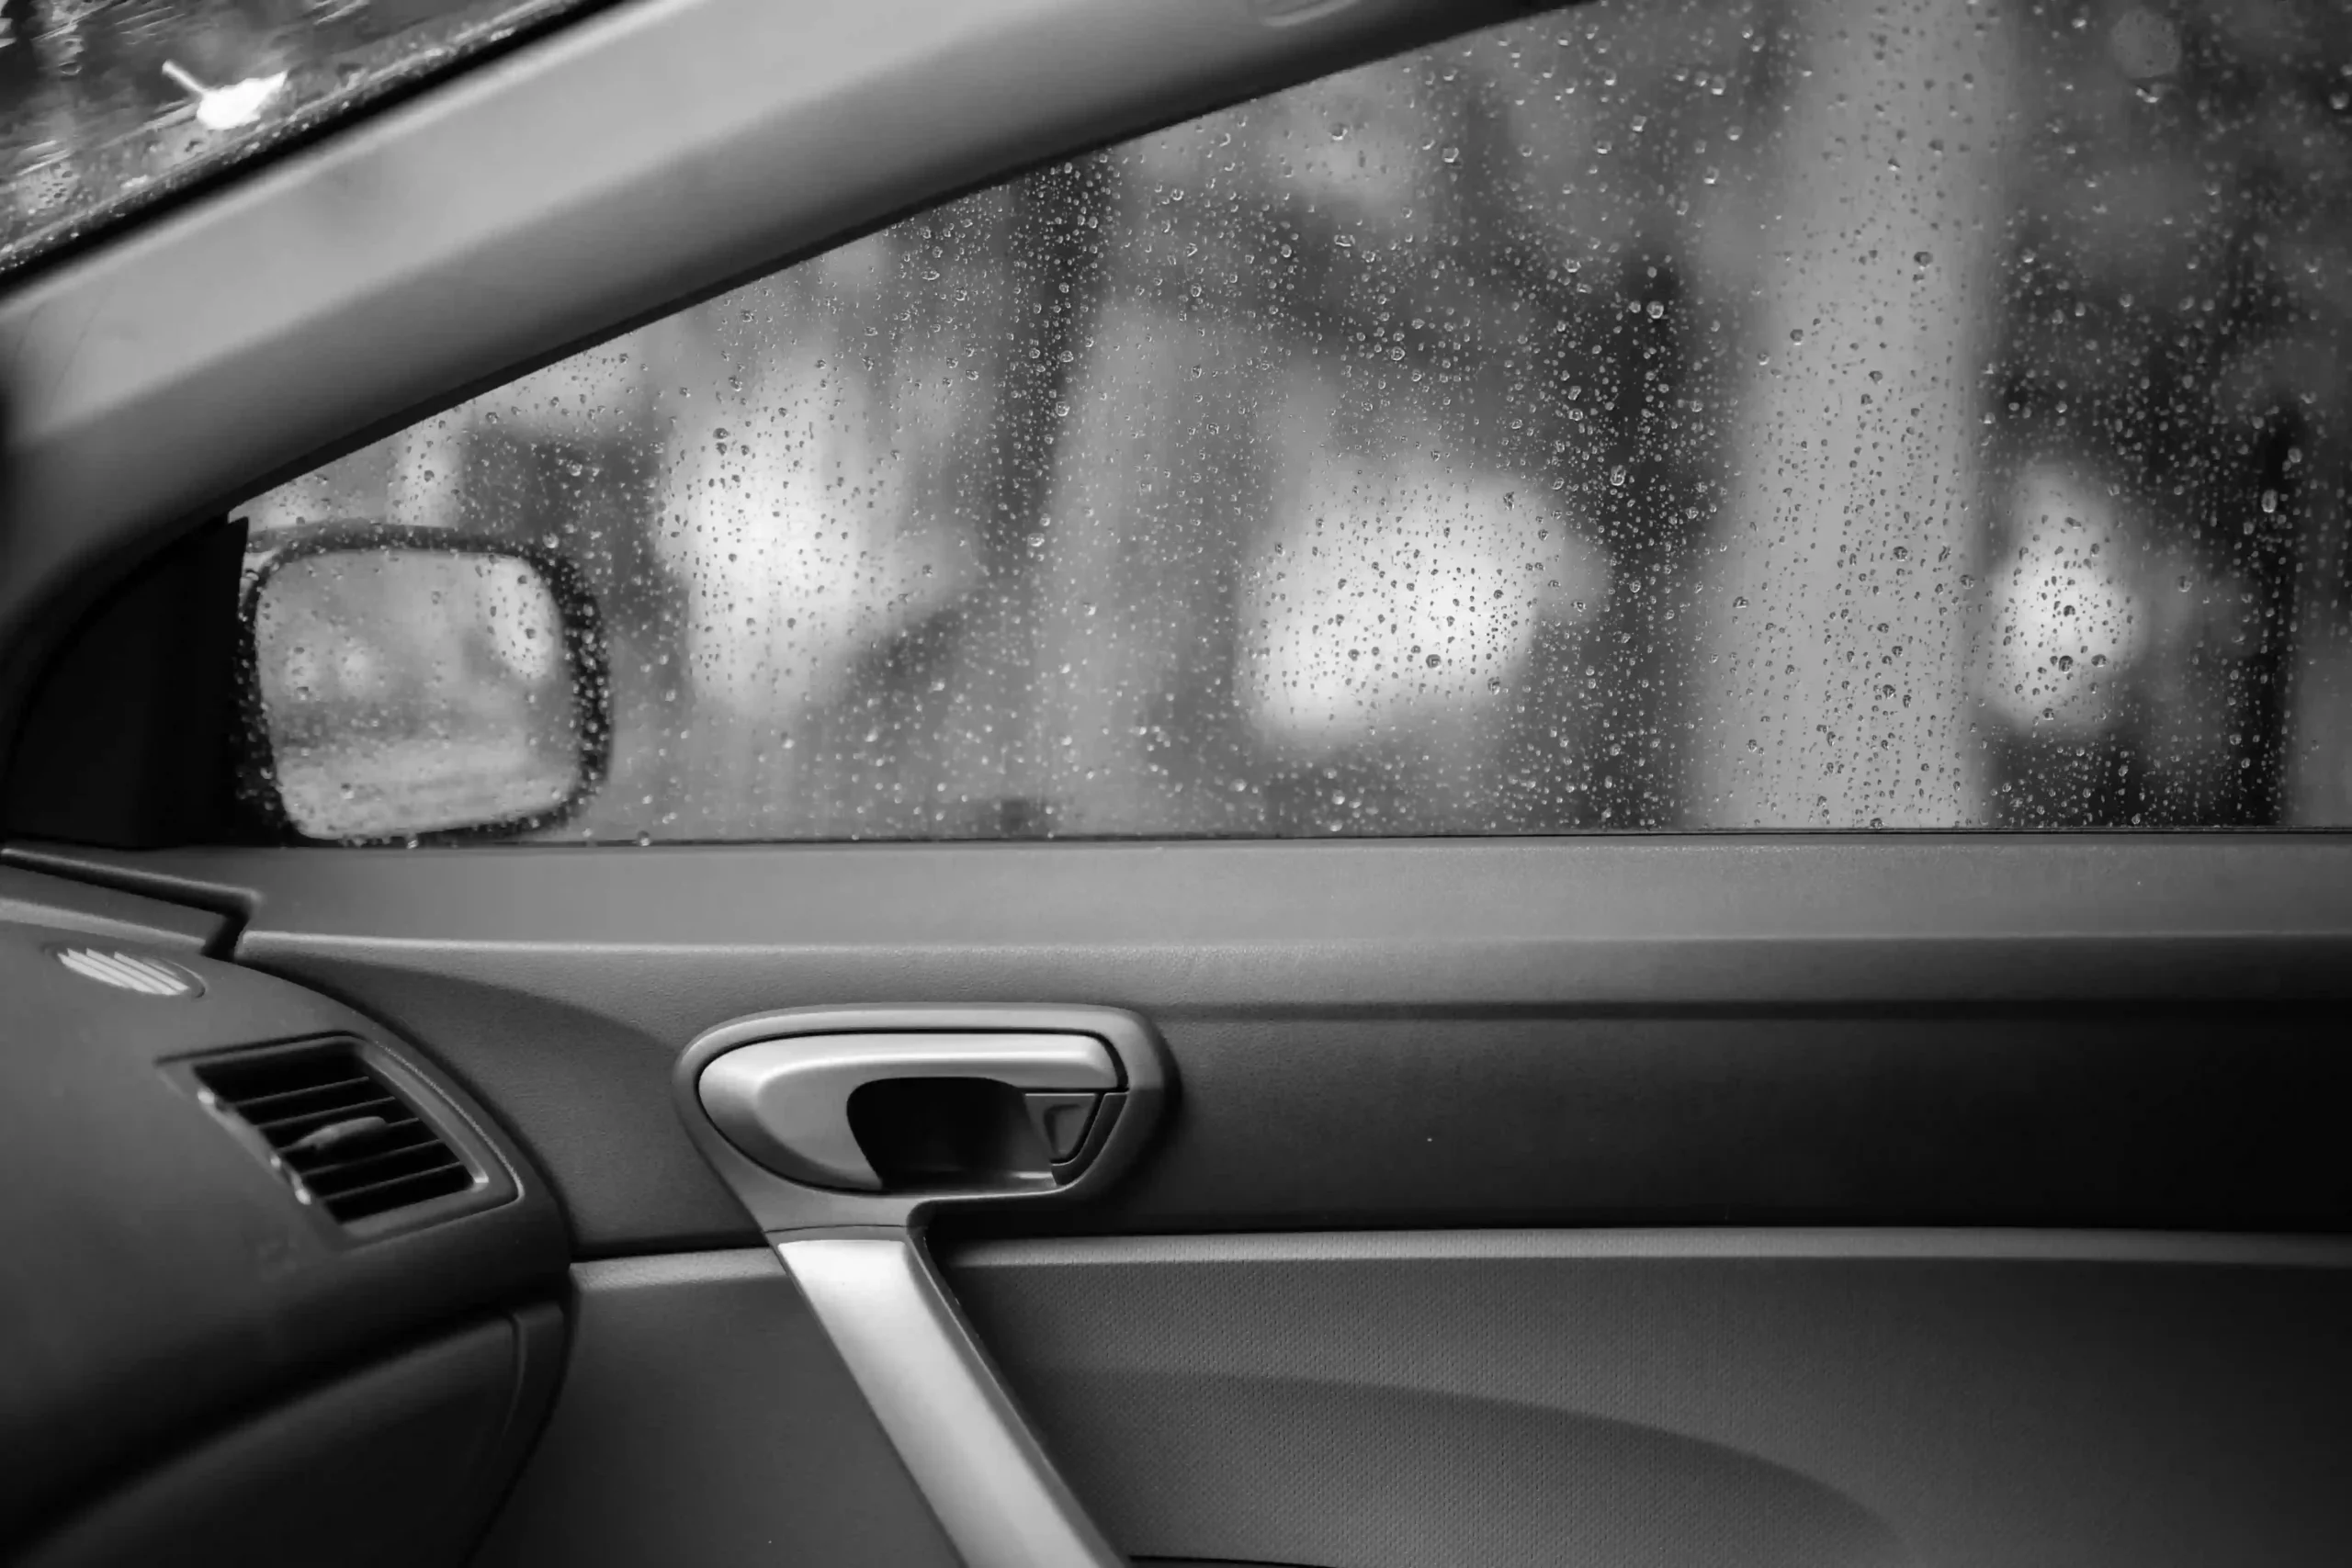 How To Clean Inside Car Windows Without Streaks